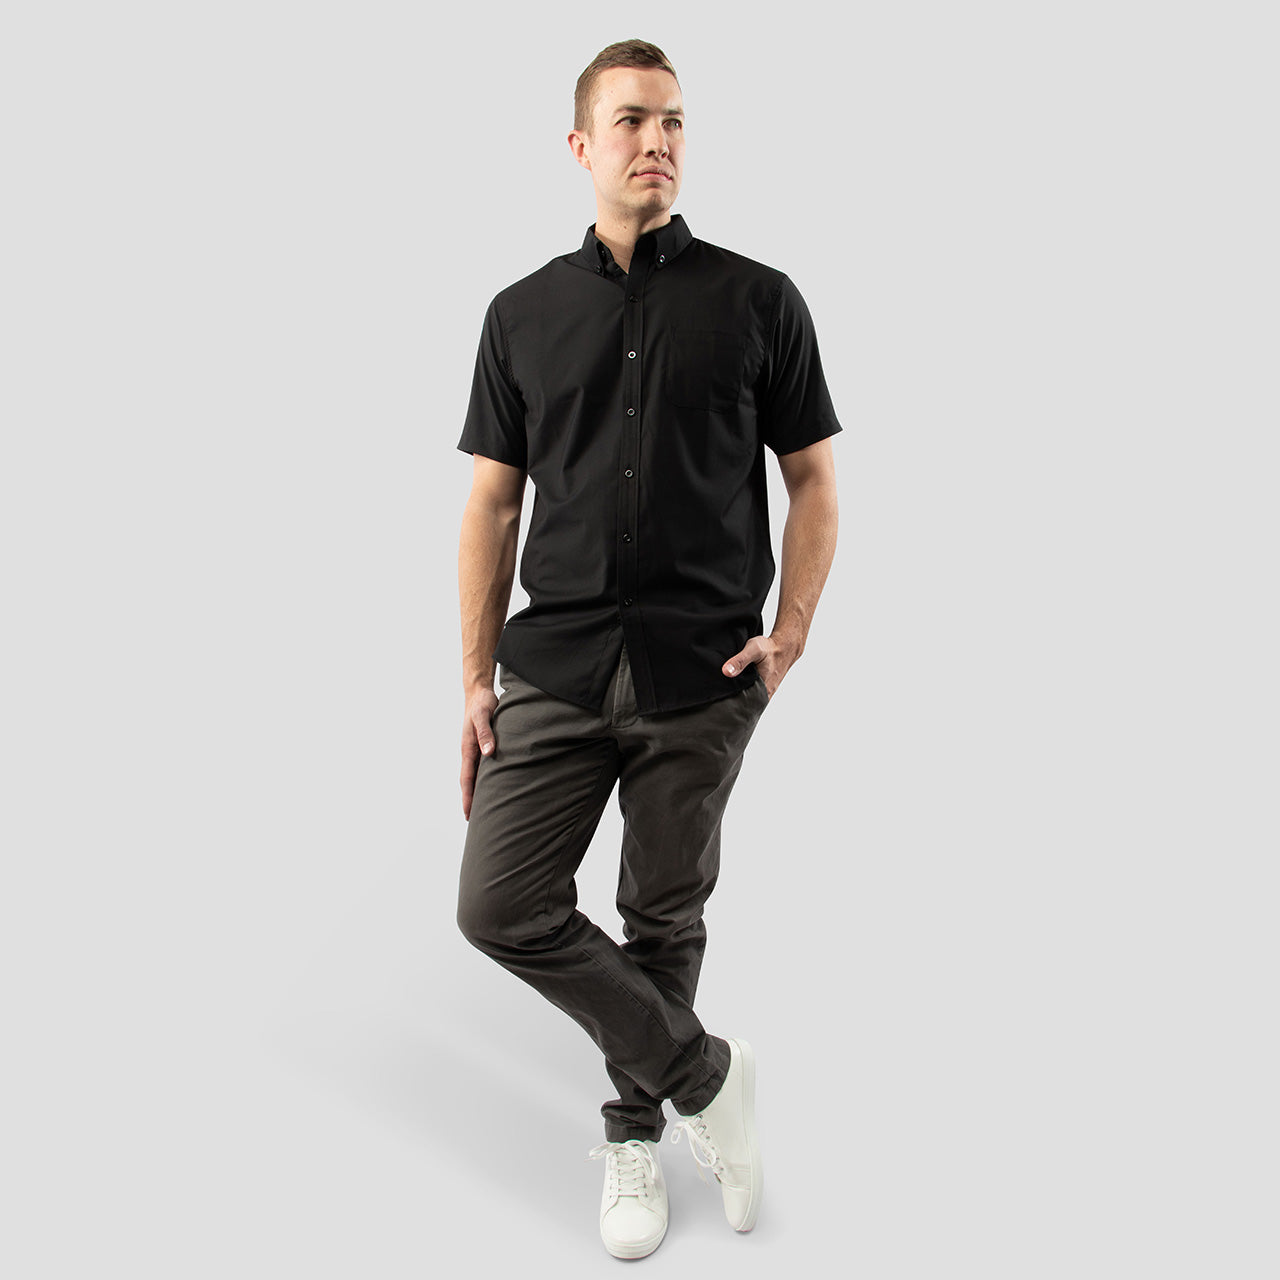 Black Casual Button Up Shirt for Tall Slim Men